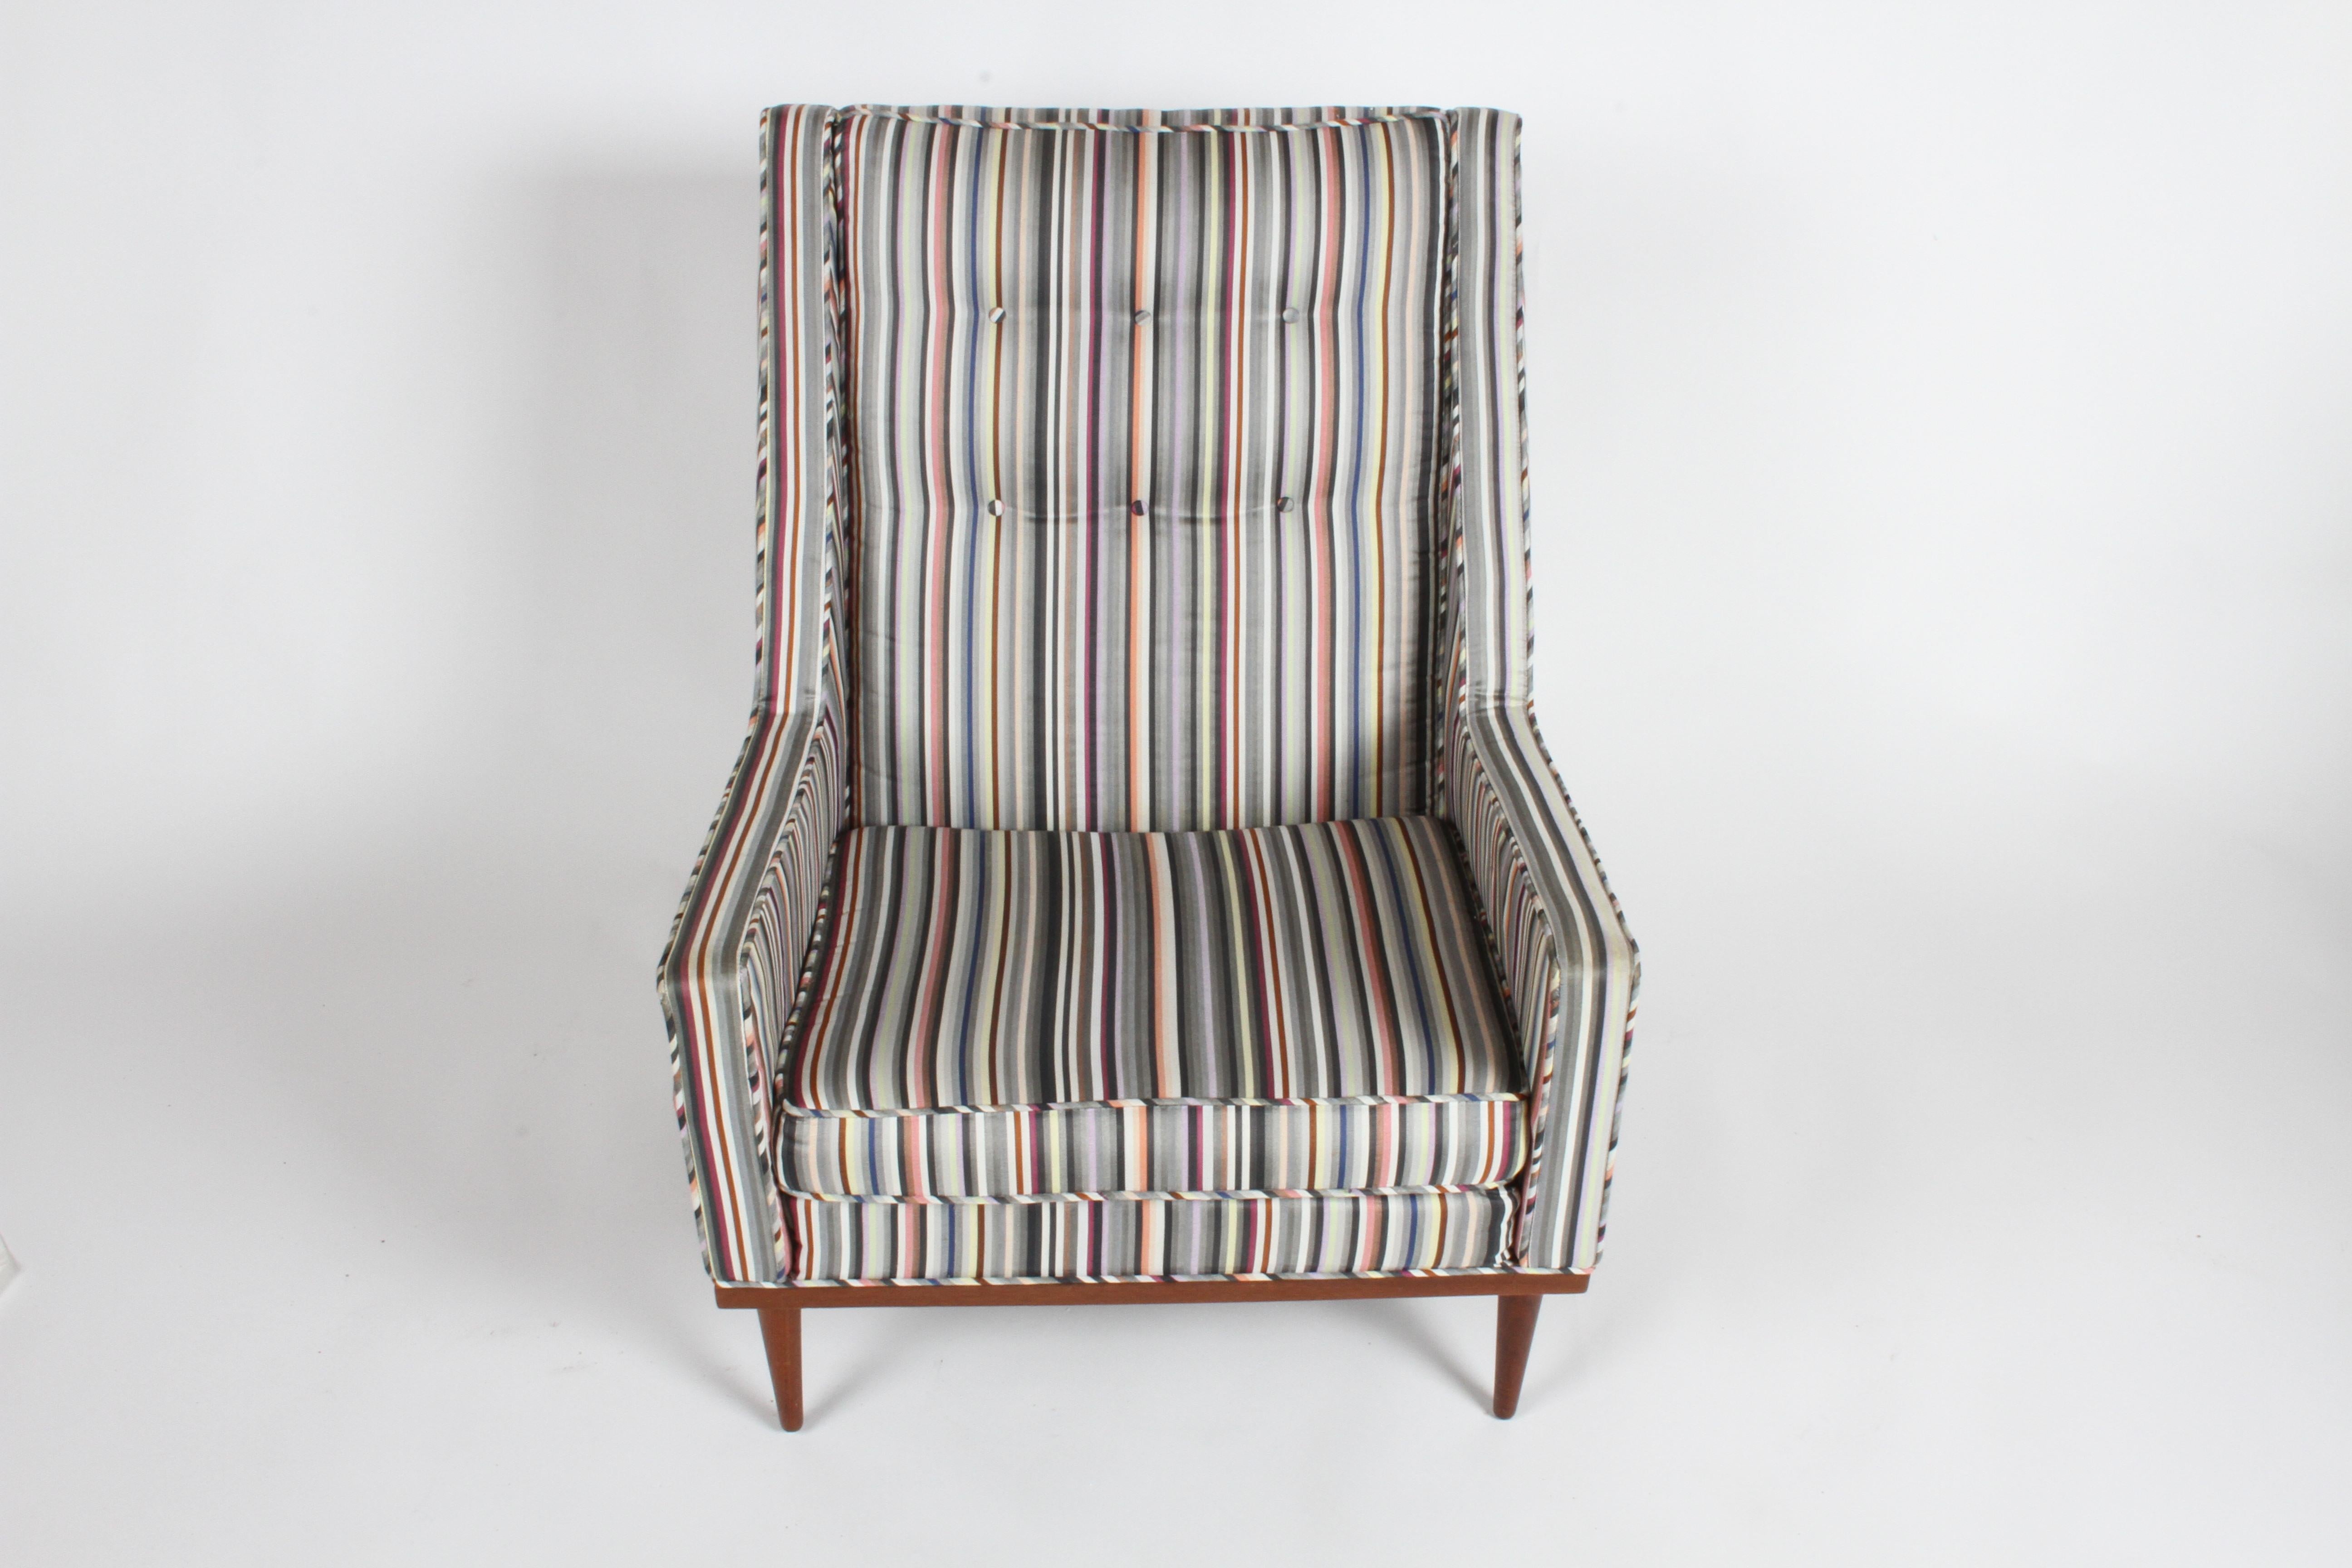 American Milo Baughman for James Inc. Walnut with Stripe Lounge Chair For Sale